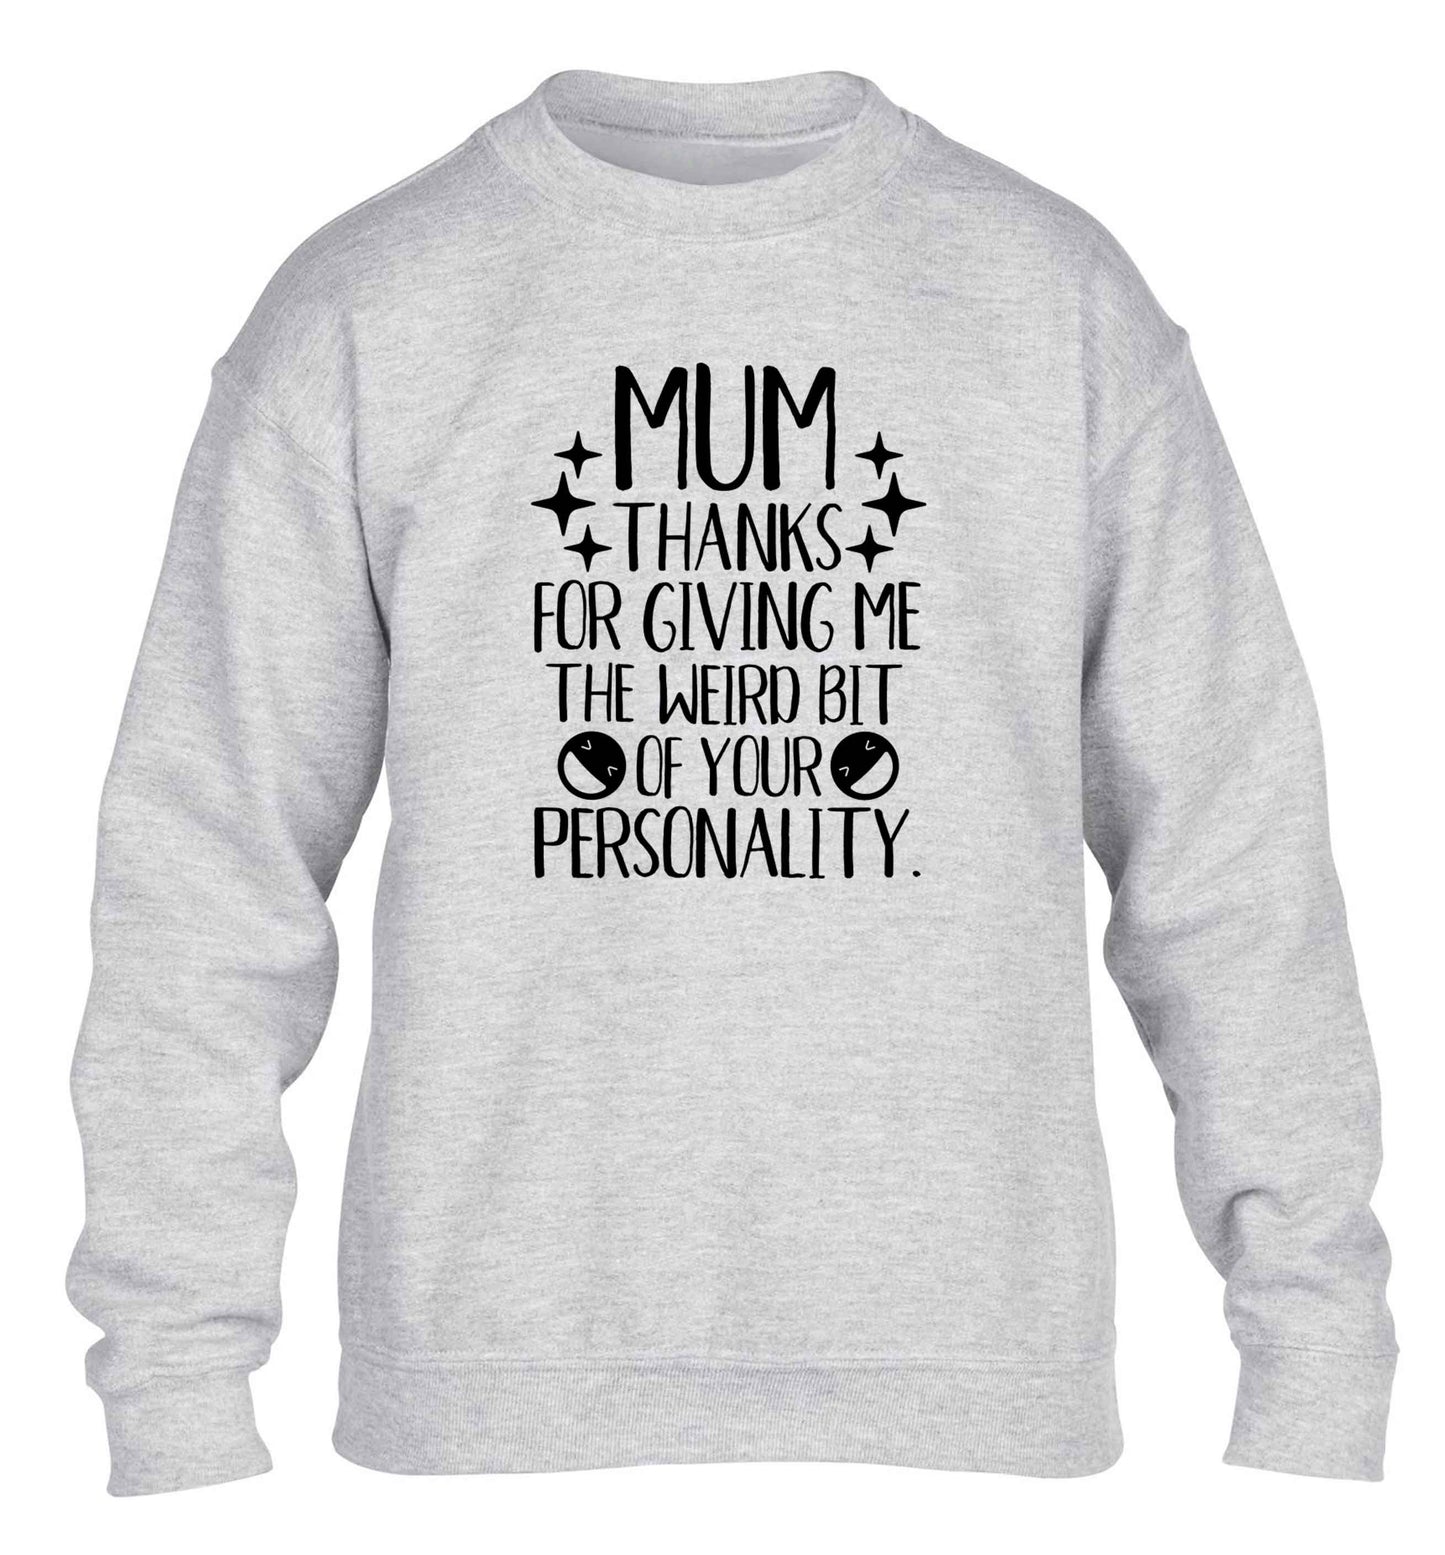 Mum, I love you more than halloumi and if you know me at all you know how deep that is children's grey sweater 12-13 Years